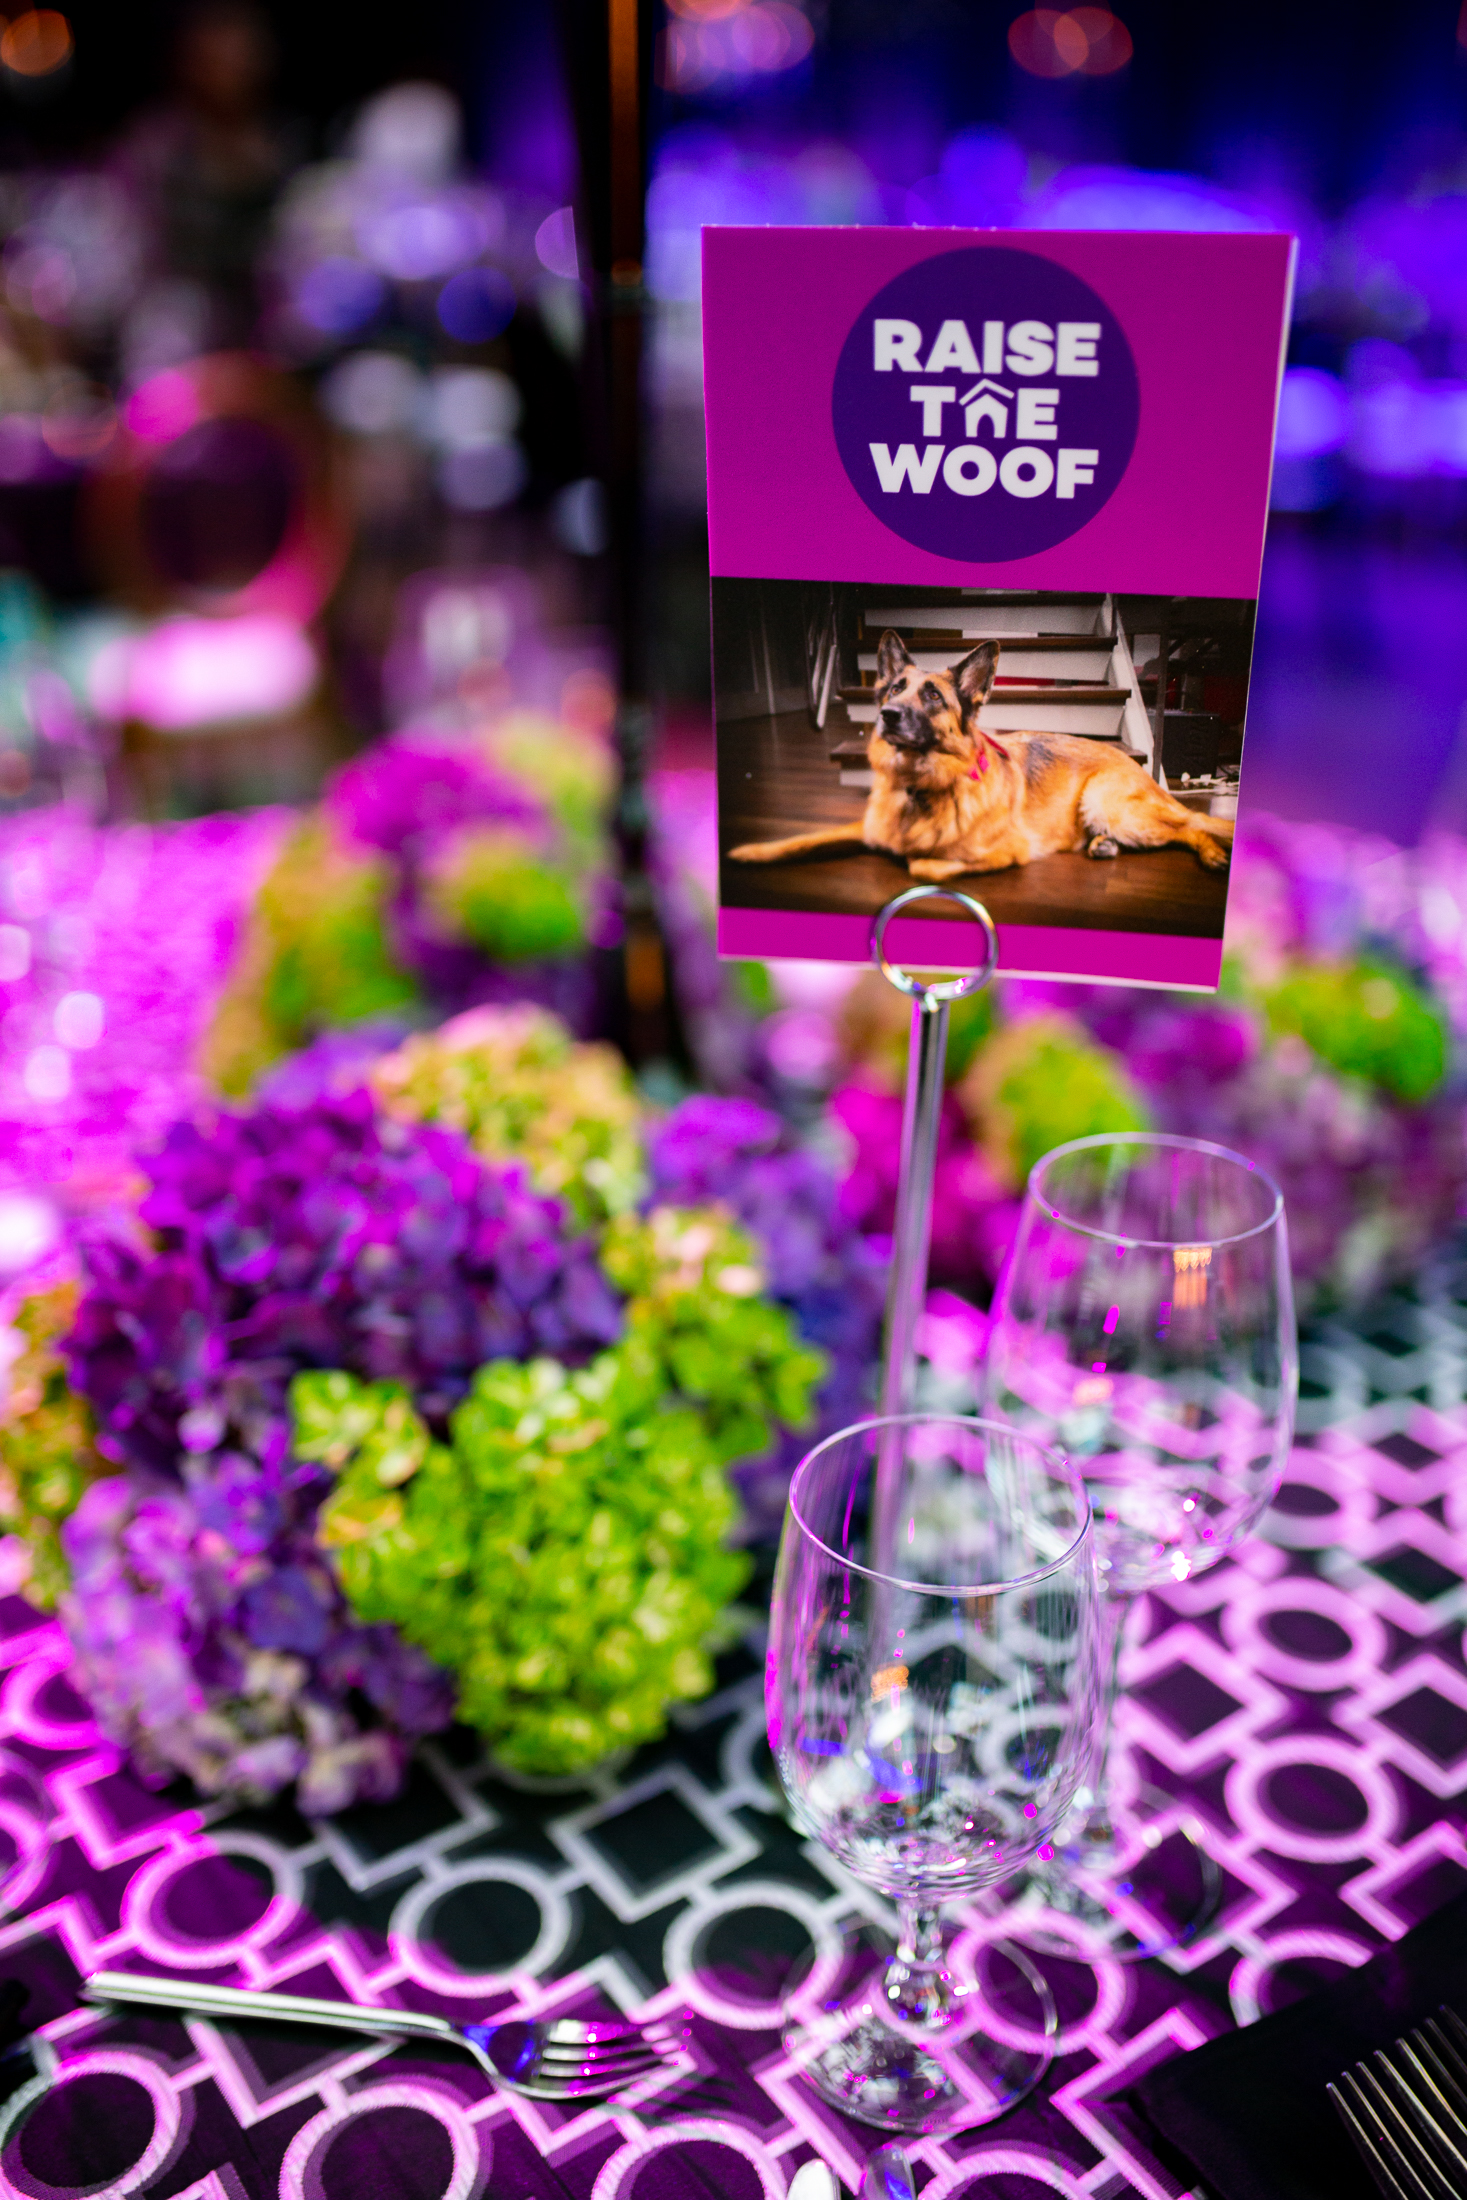 MSPCA raise the woof table sign